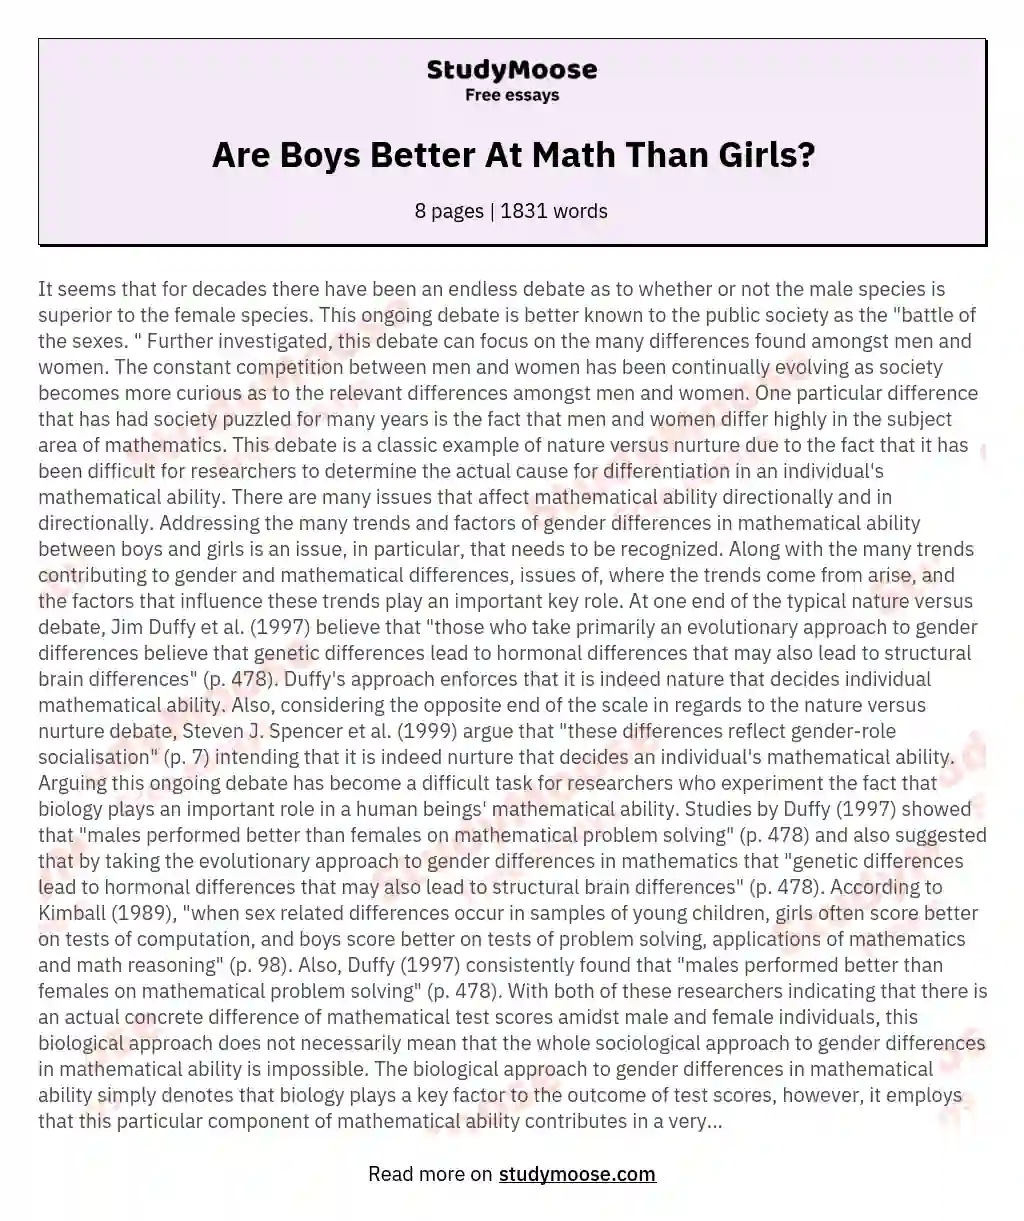 Are Boys Better At Math Than Girls? essay